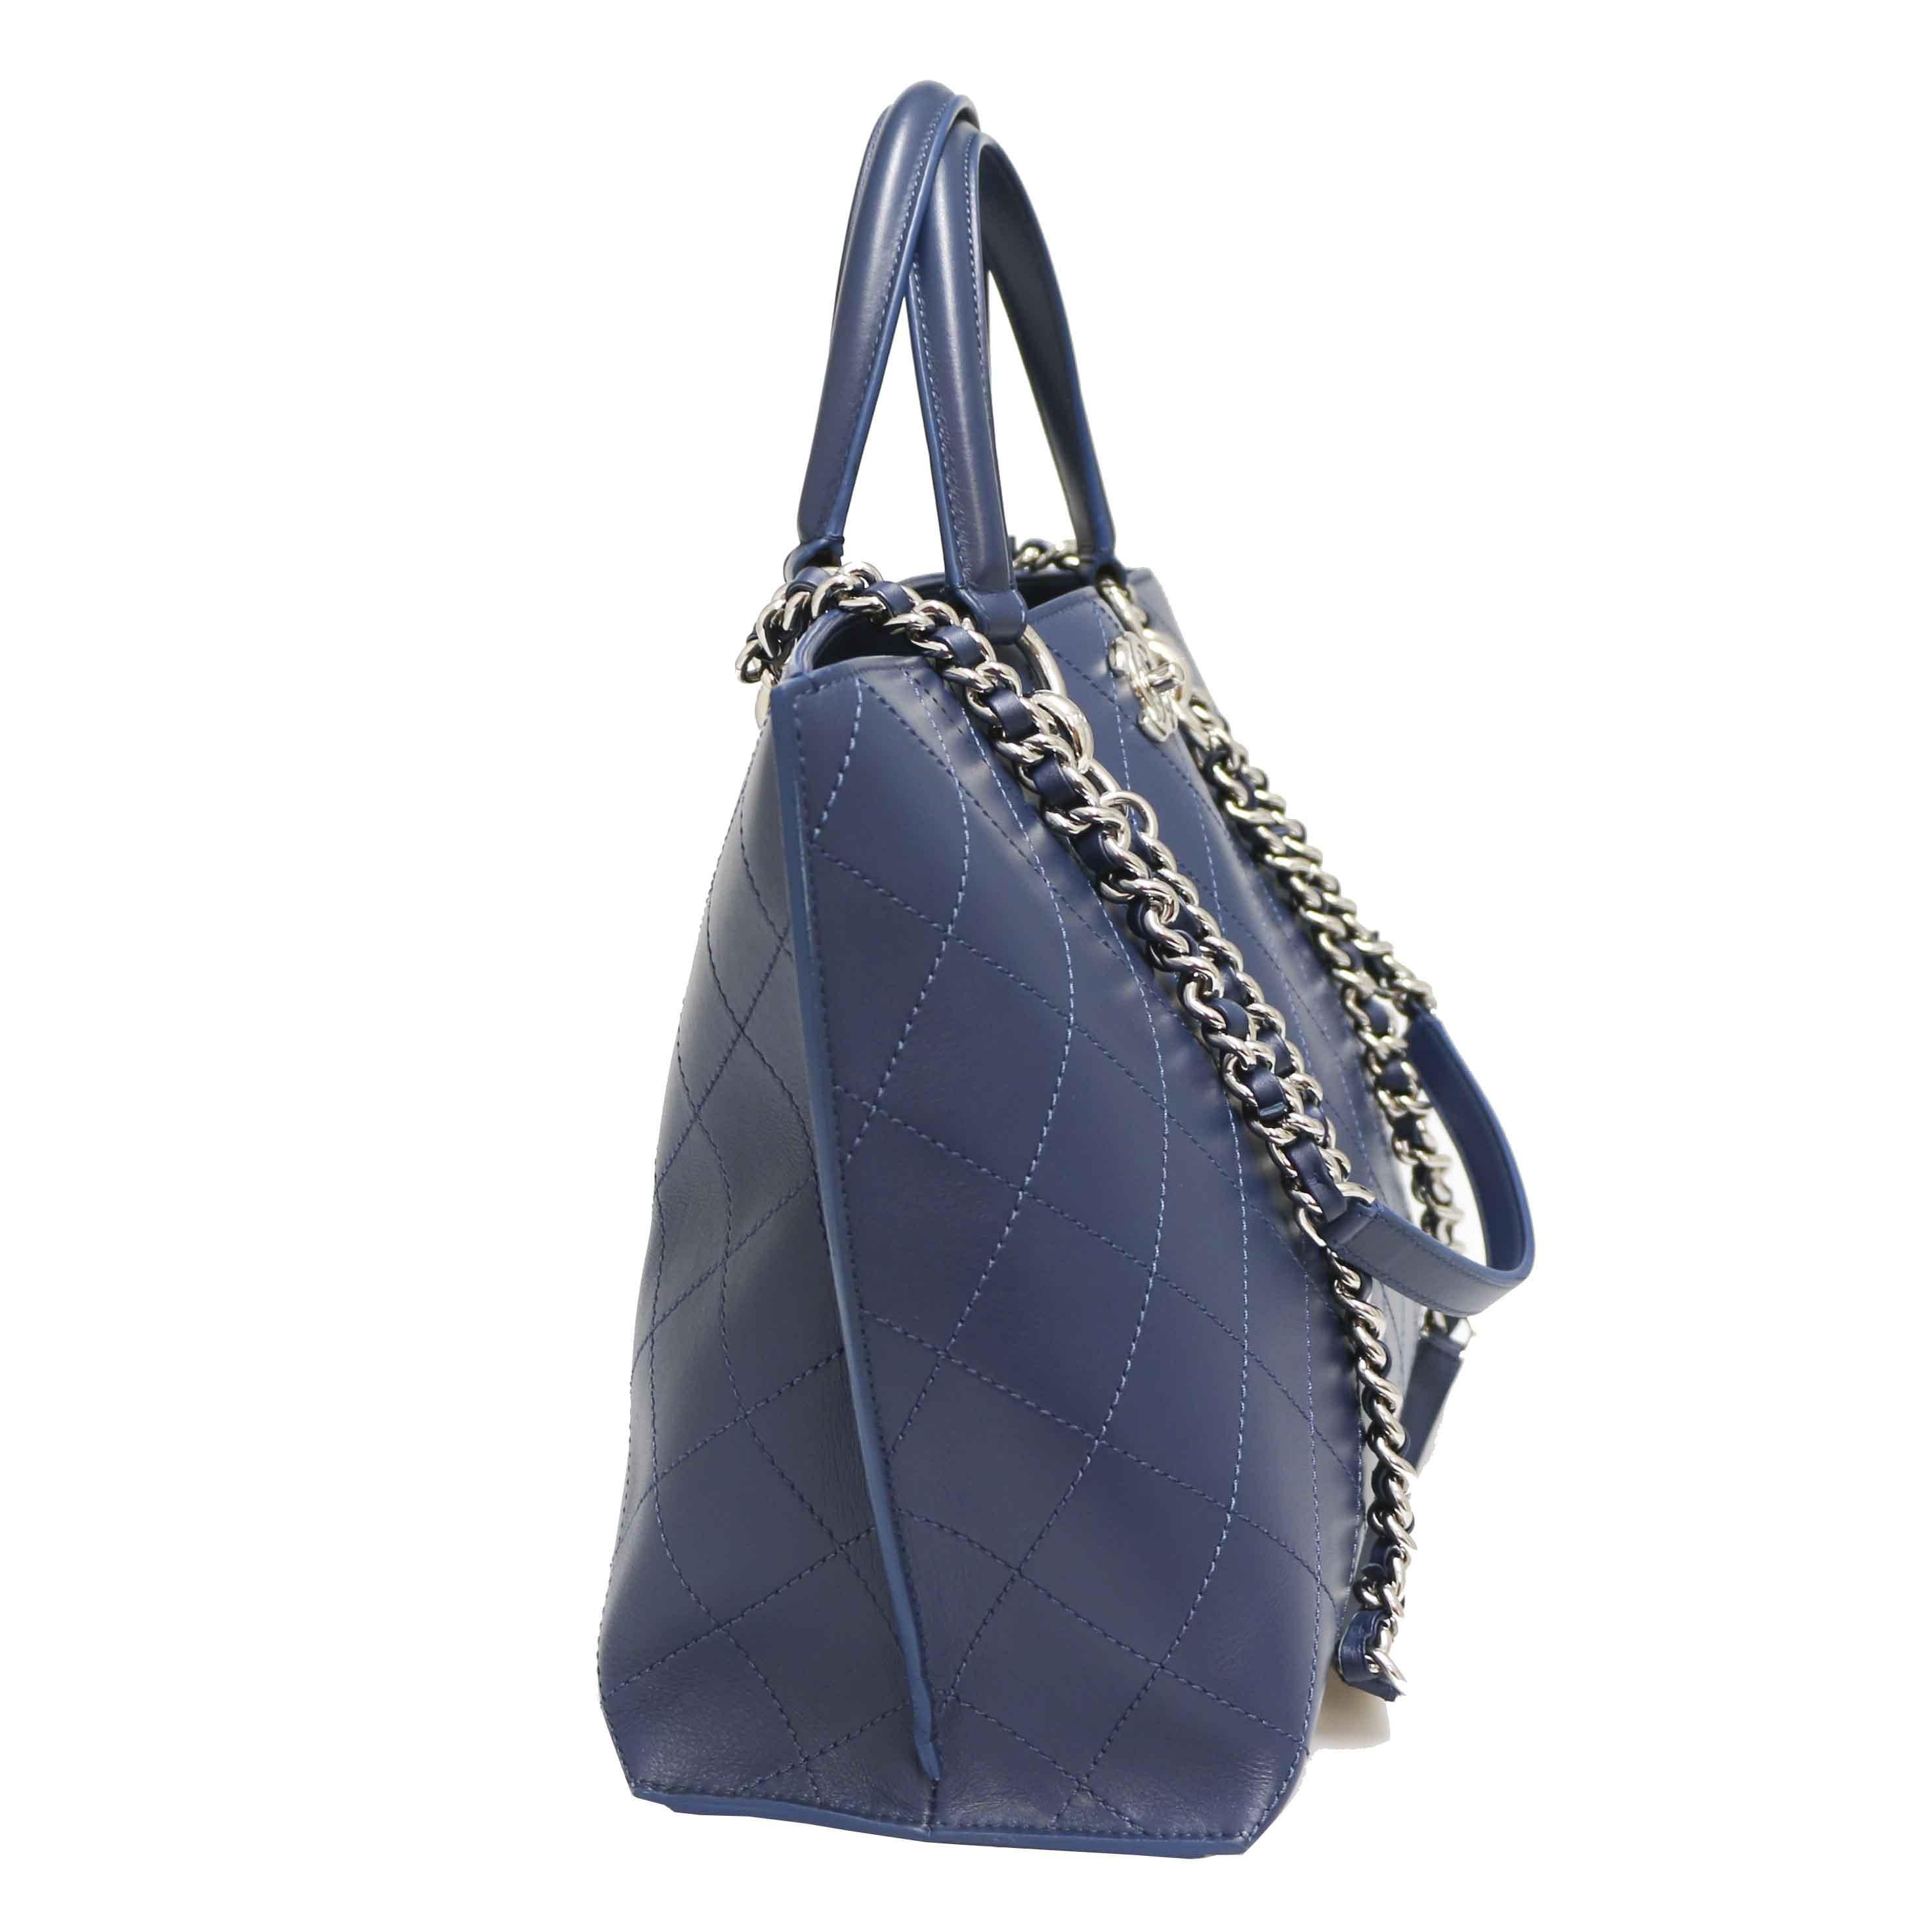 CHANEL tote bag in blue leather. The hardware is in palladium-plated silver metal. The lining is in blue fabric.
1 large zipped pocket inside.

In very good condition, worn once.
Made in Italy.
Dimensions: 35 x 23 x 13cm.
Handles: 35cm - Handles: 69